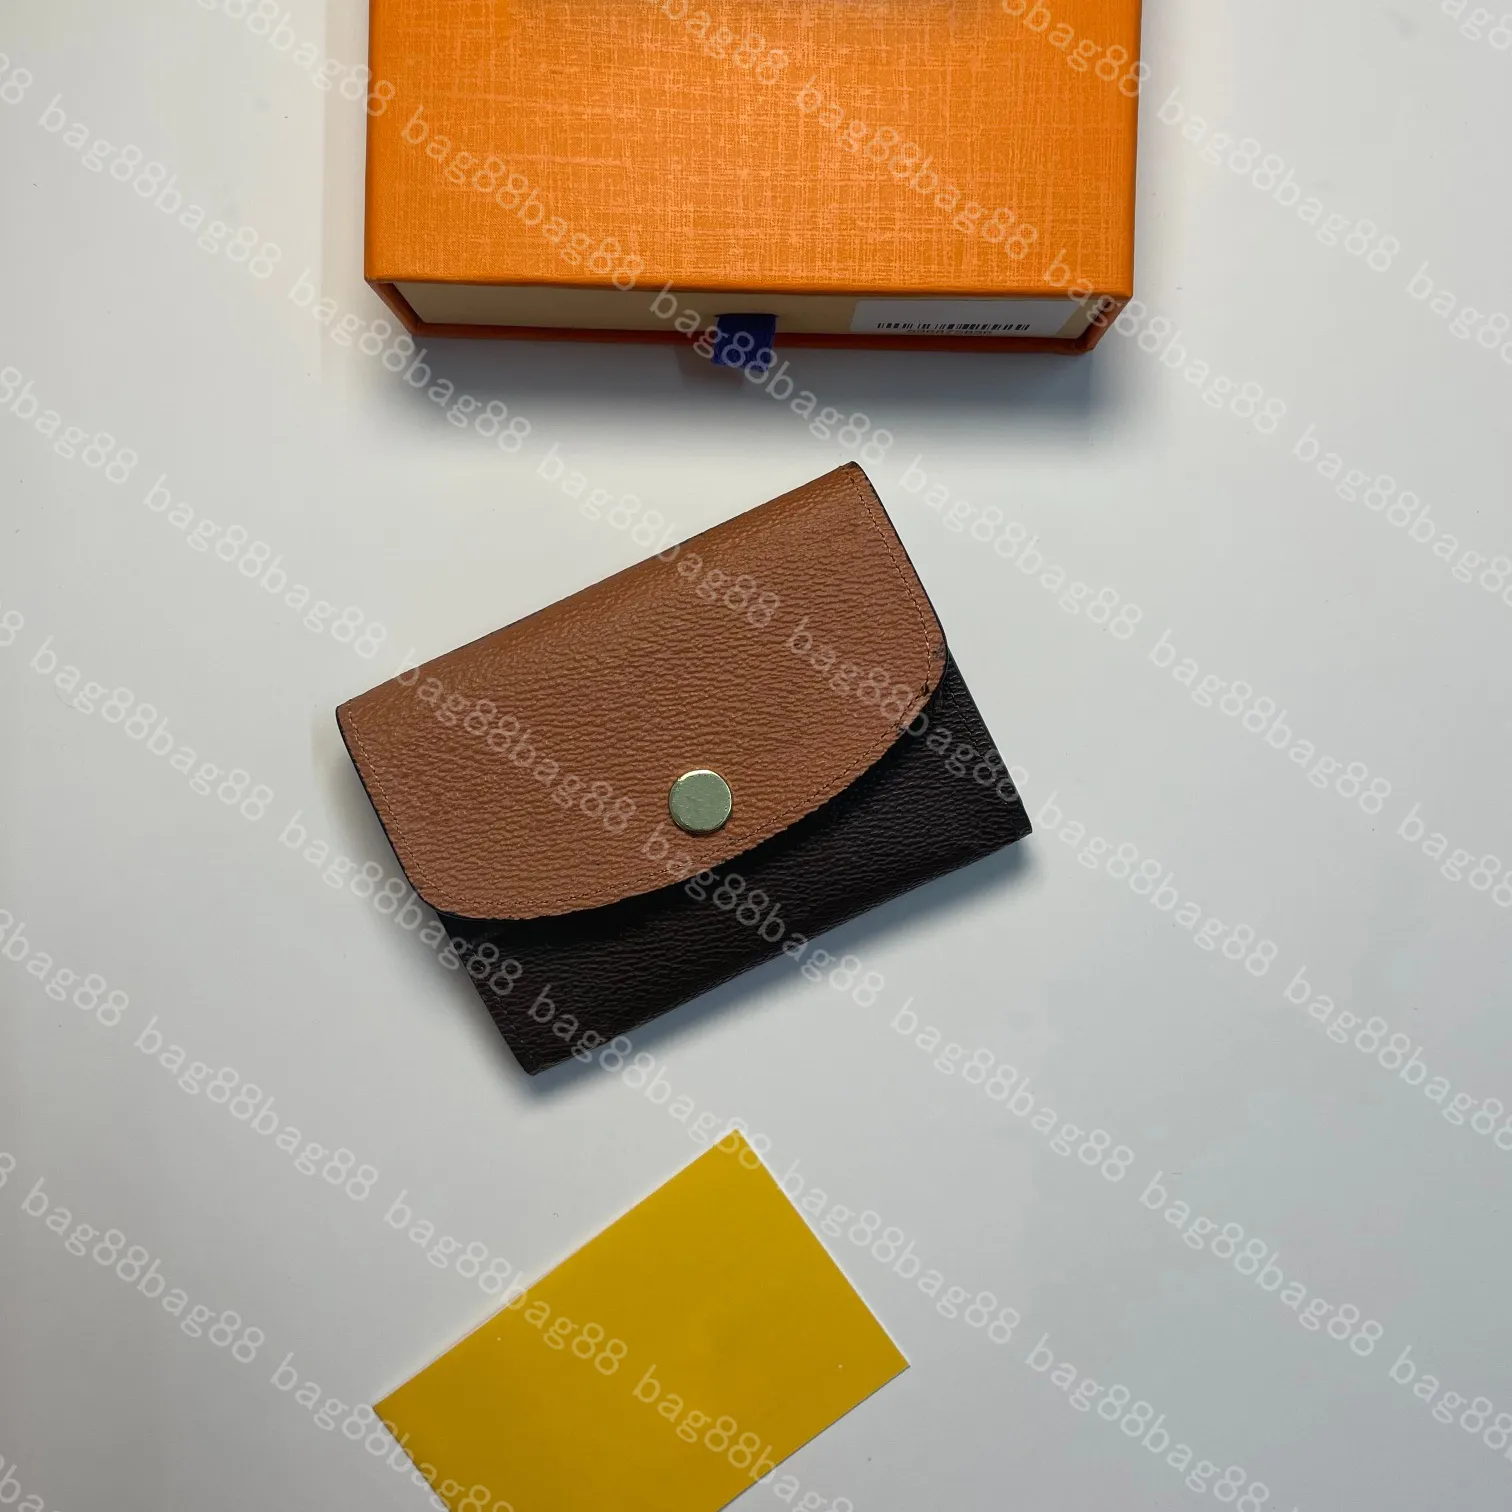 Classic Old Flower and Yellow Flower Combination Card Bag Gold Button Small Wallet with Flat Pocket with Zipper Coin Pocket and 2 Card Slots on the Inner Side